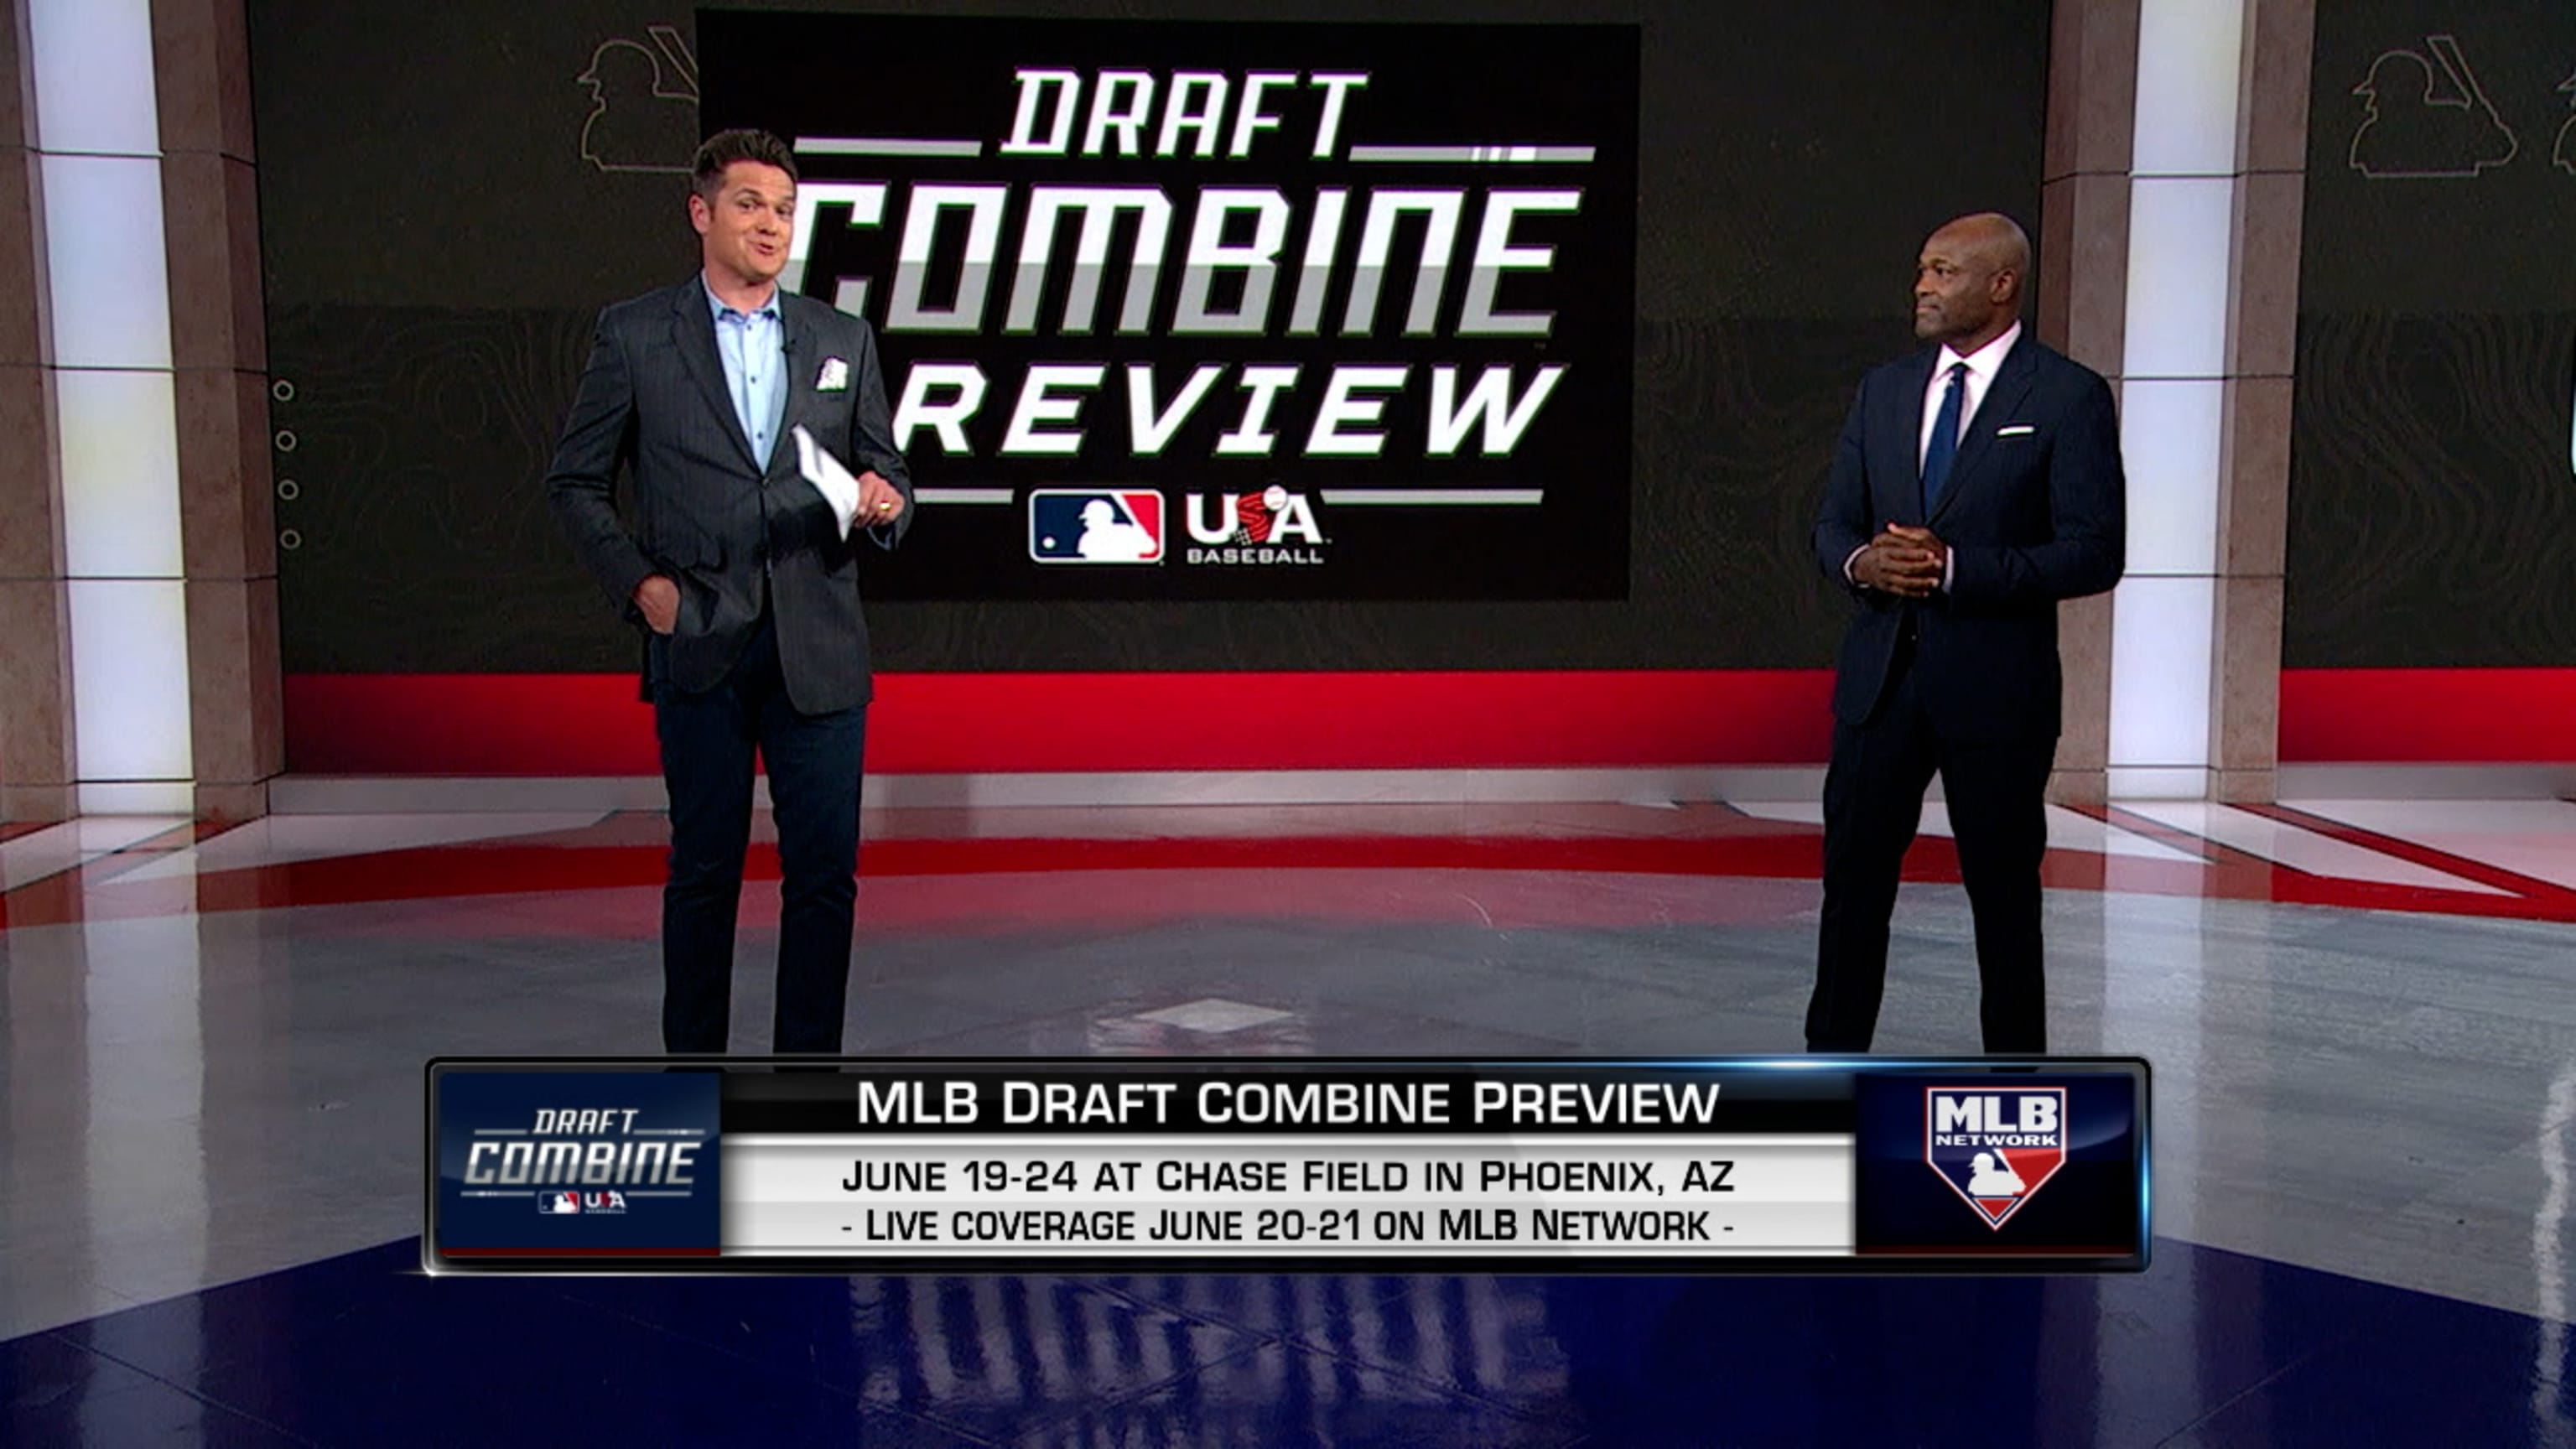 Players to watch at the MLB Draft Combine